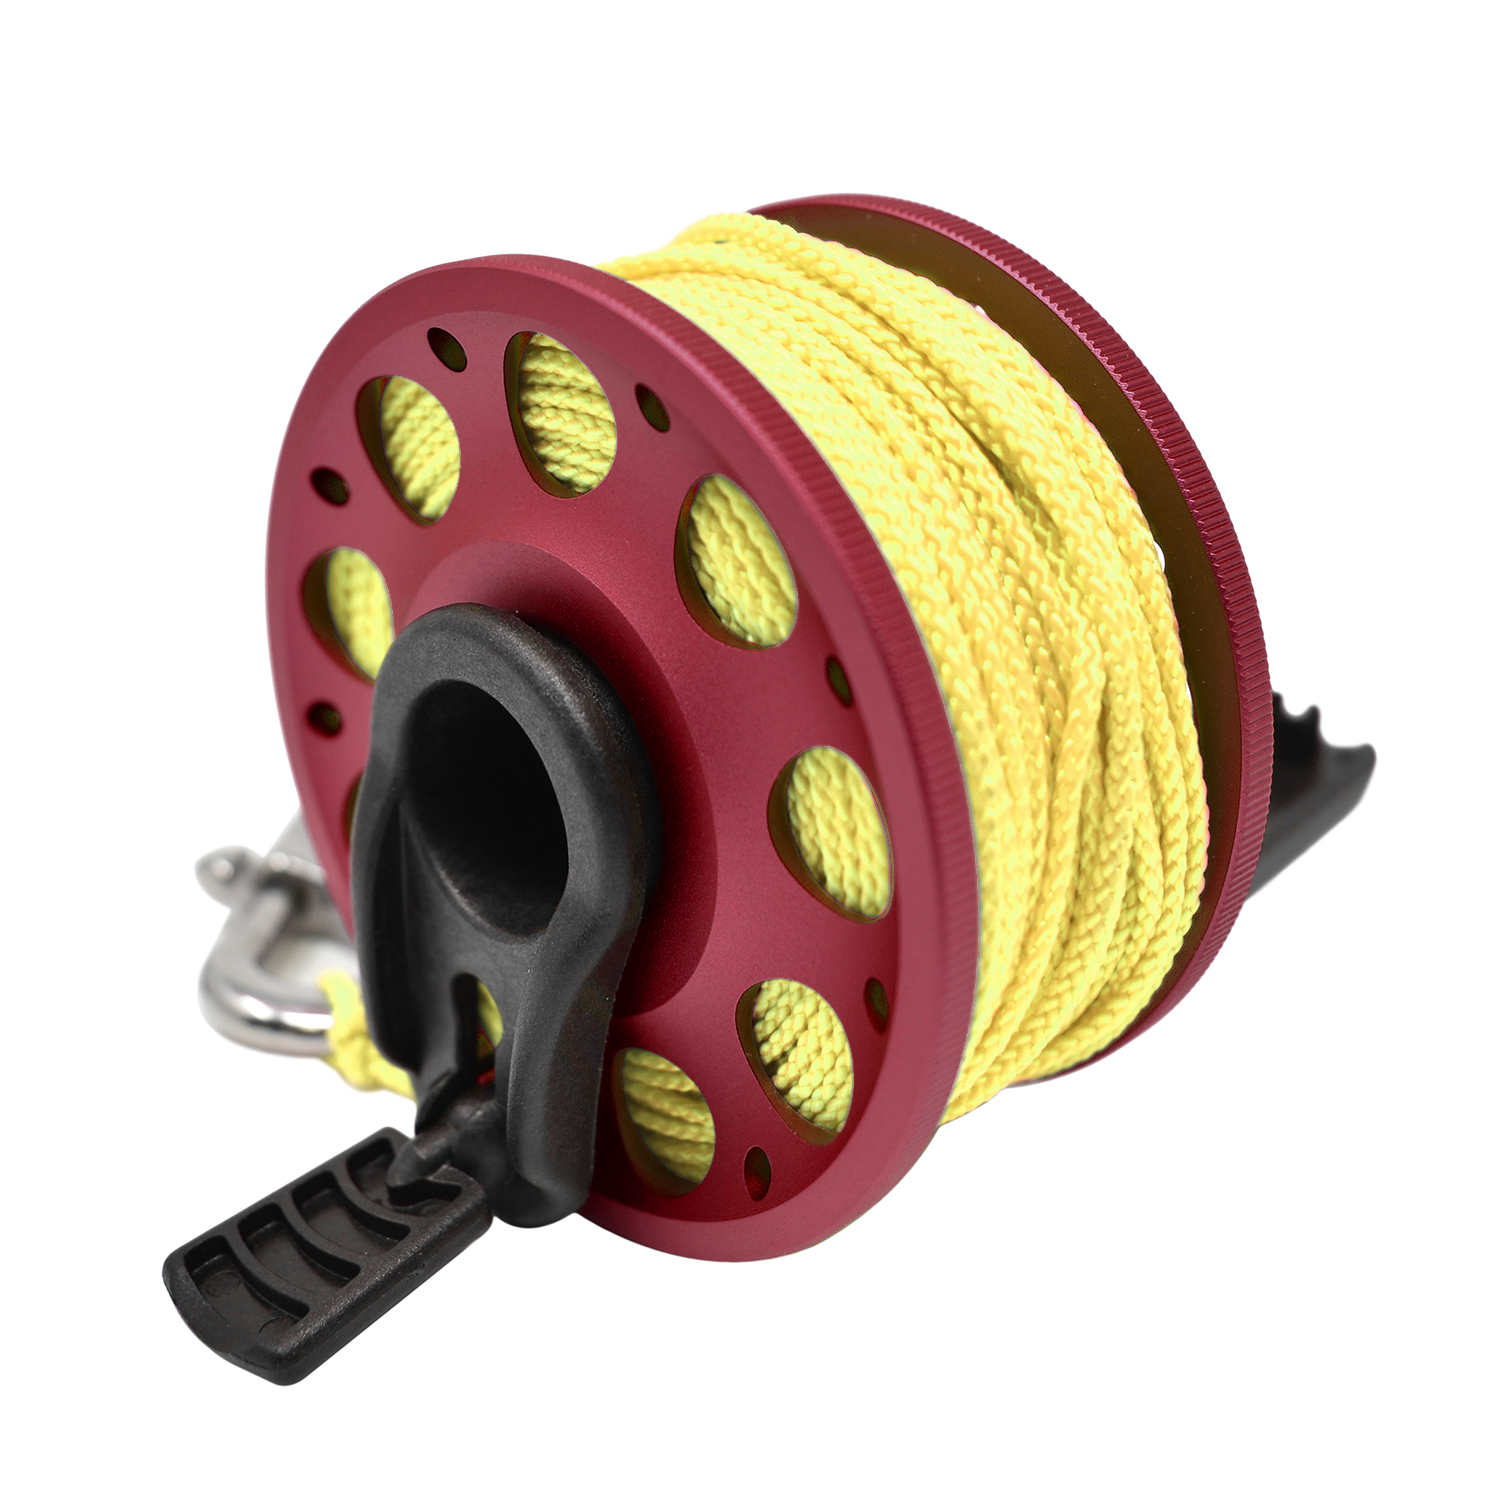 Aluminum Finger Spool 100ft Dive Reel w/ Retractable Holder, Red/Yellow - image 2 of 4